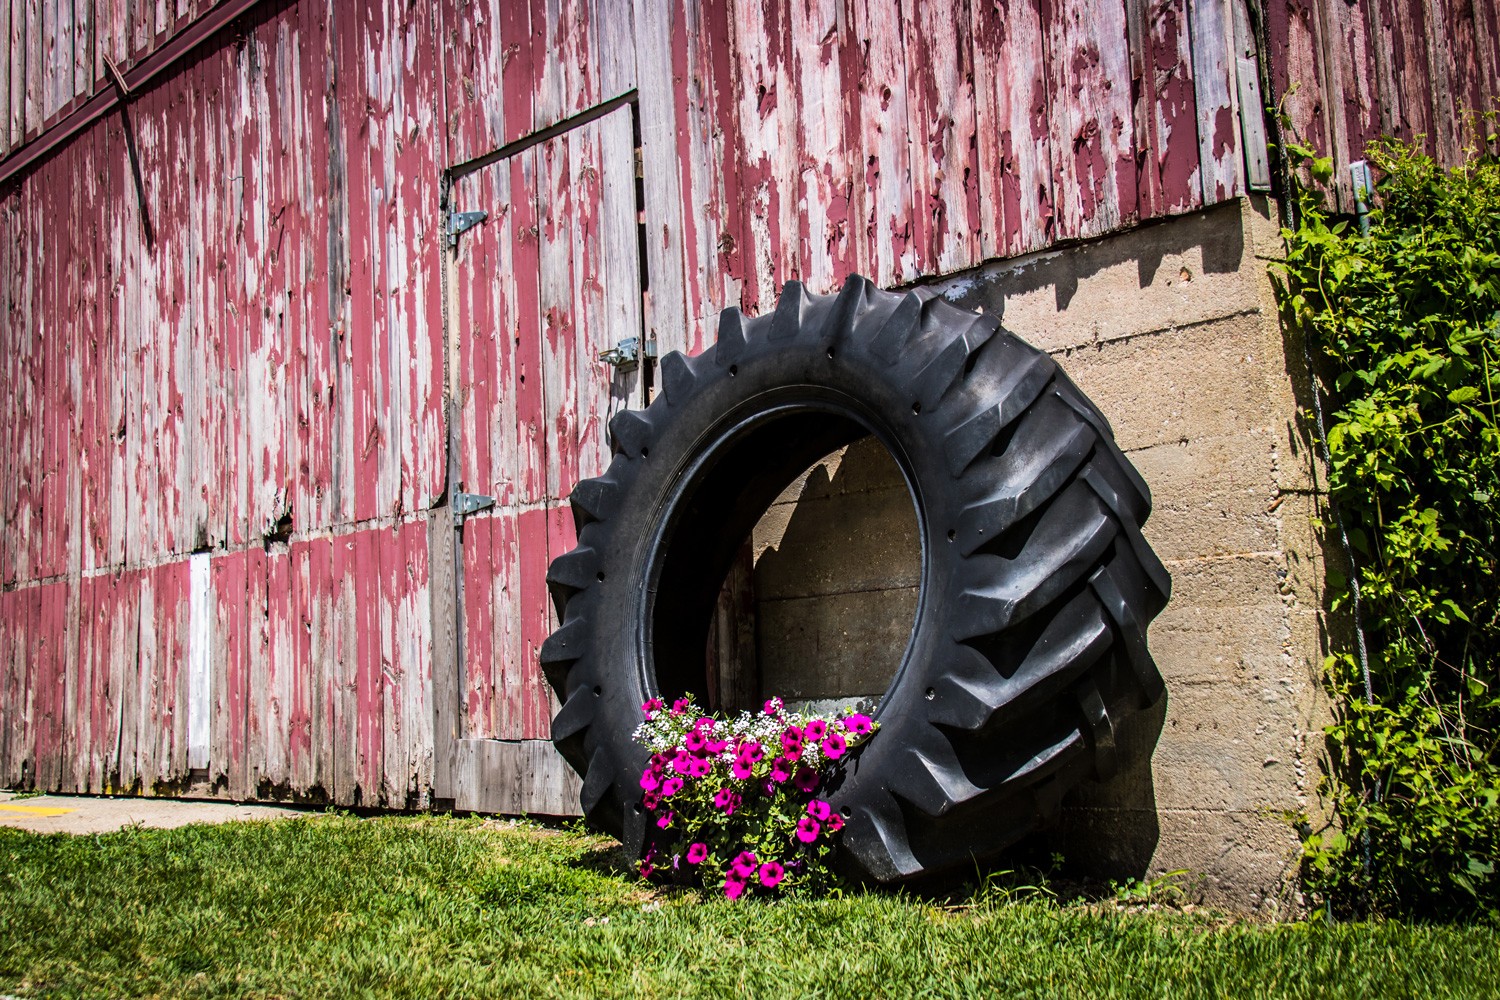 A tractor tire used as a flowerbed leaned up against a red barn.